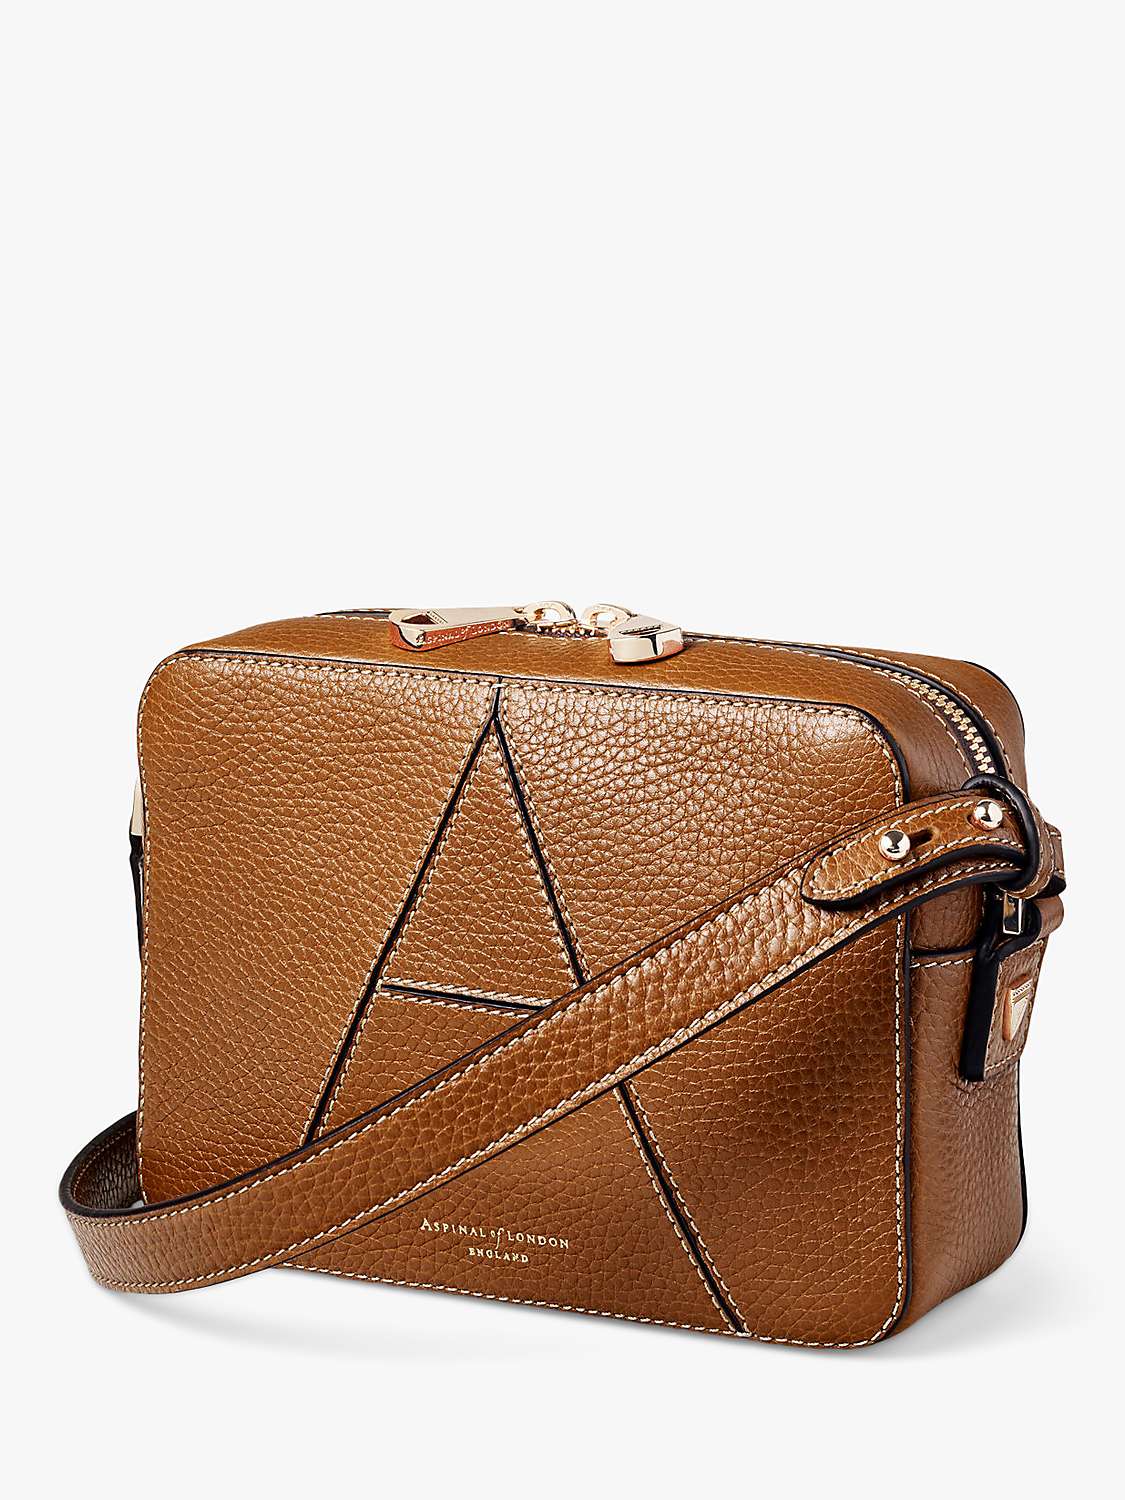 Buy Aspinal of London Pebble Leather Camera A Bag Online at johnlewis.com